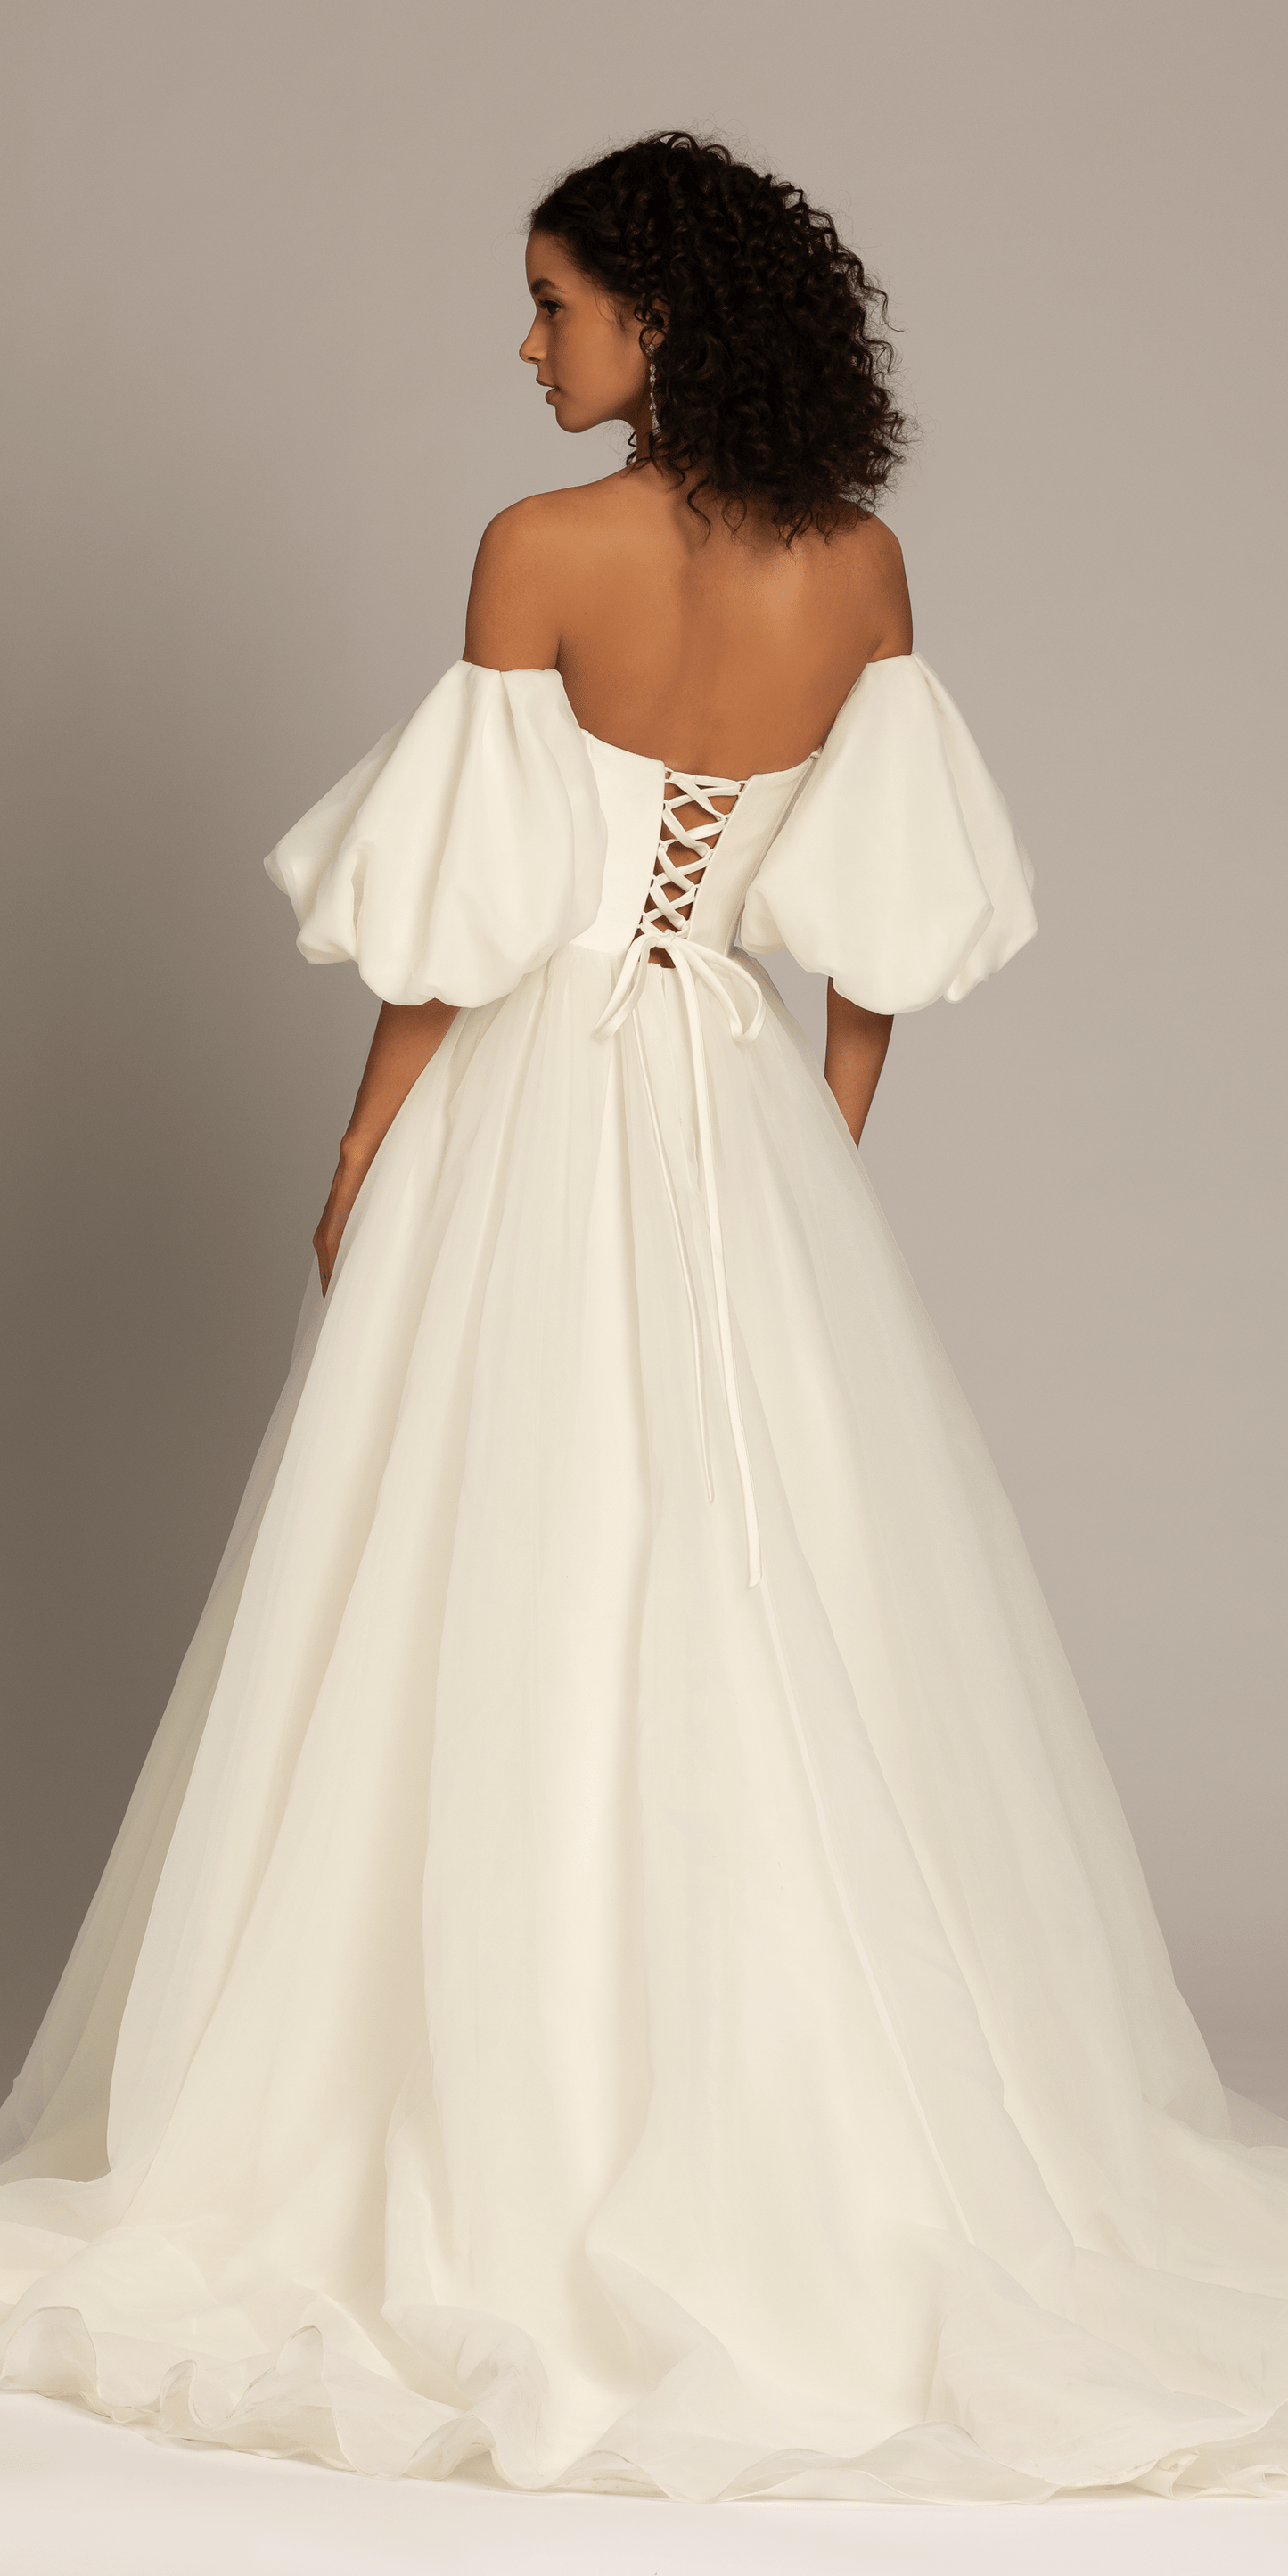 Camille La Vie Organza Lace Up Back Ballgown with Detachable Sleeves